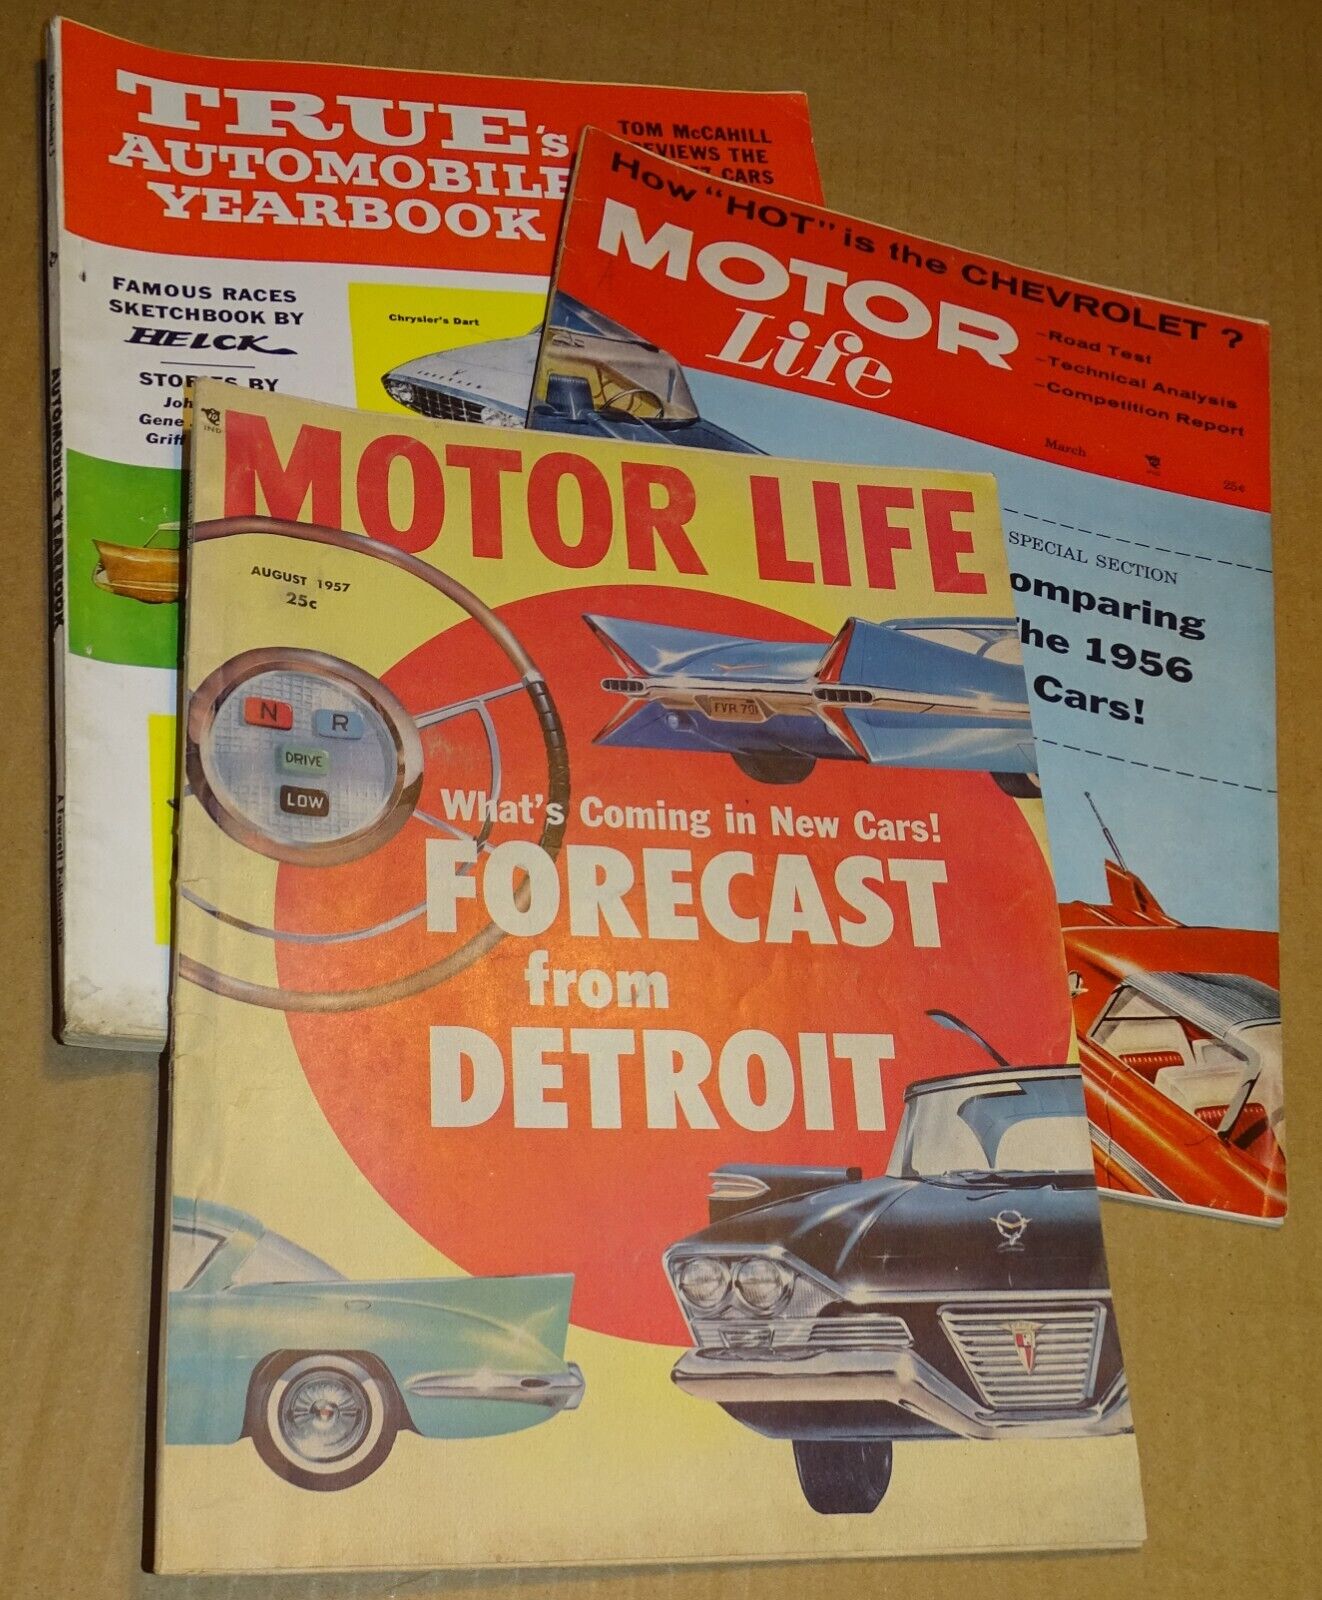 Motor Life Aug. 1957/March 1956 & True's Automobile Yearbook #5 1957 (magazines)